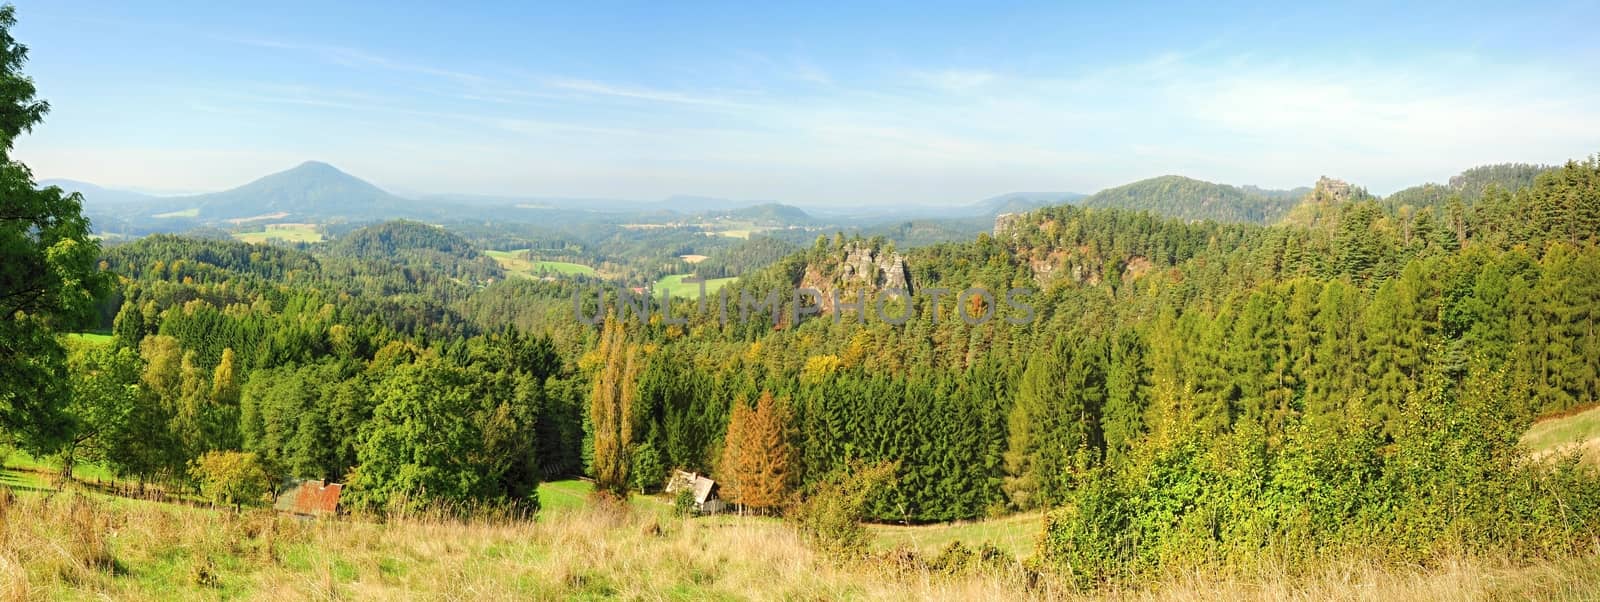 Landscape in Czech Switzerland - panoramic view of the rocks and forests